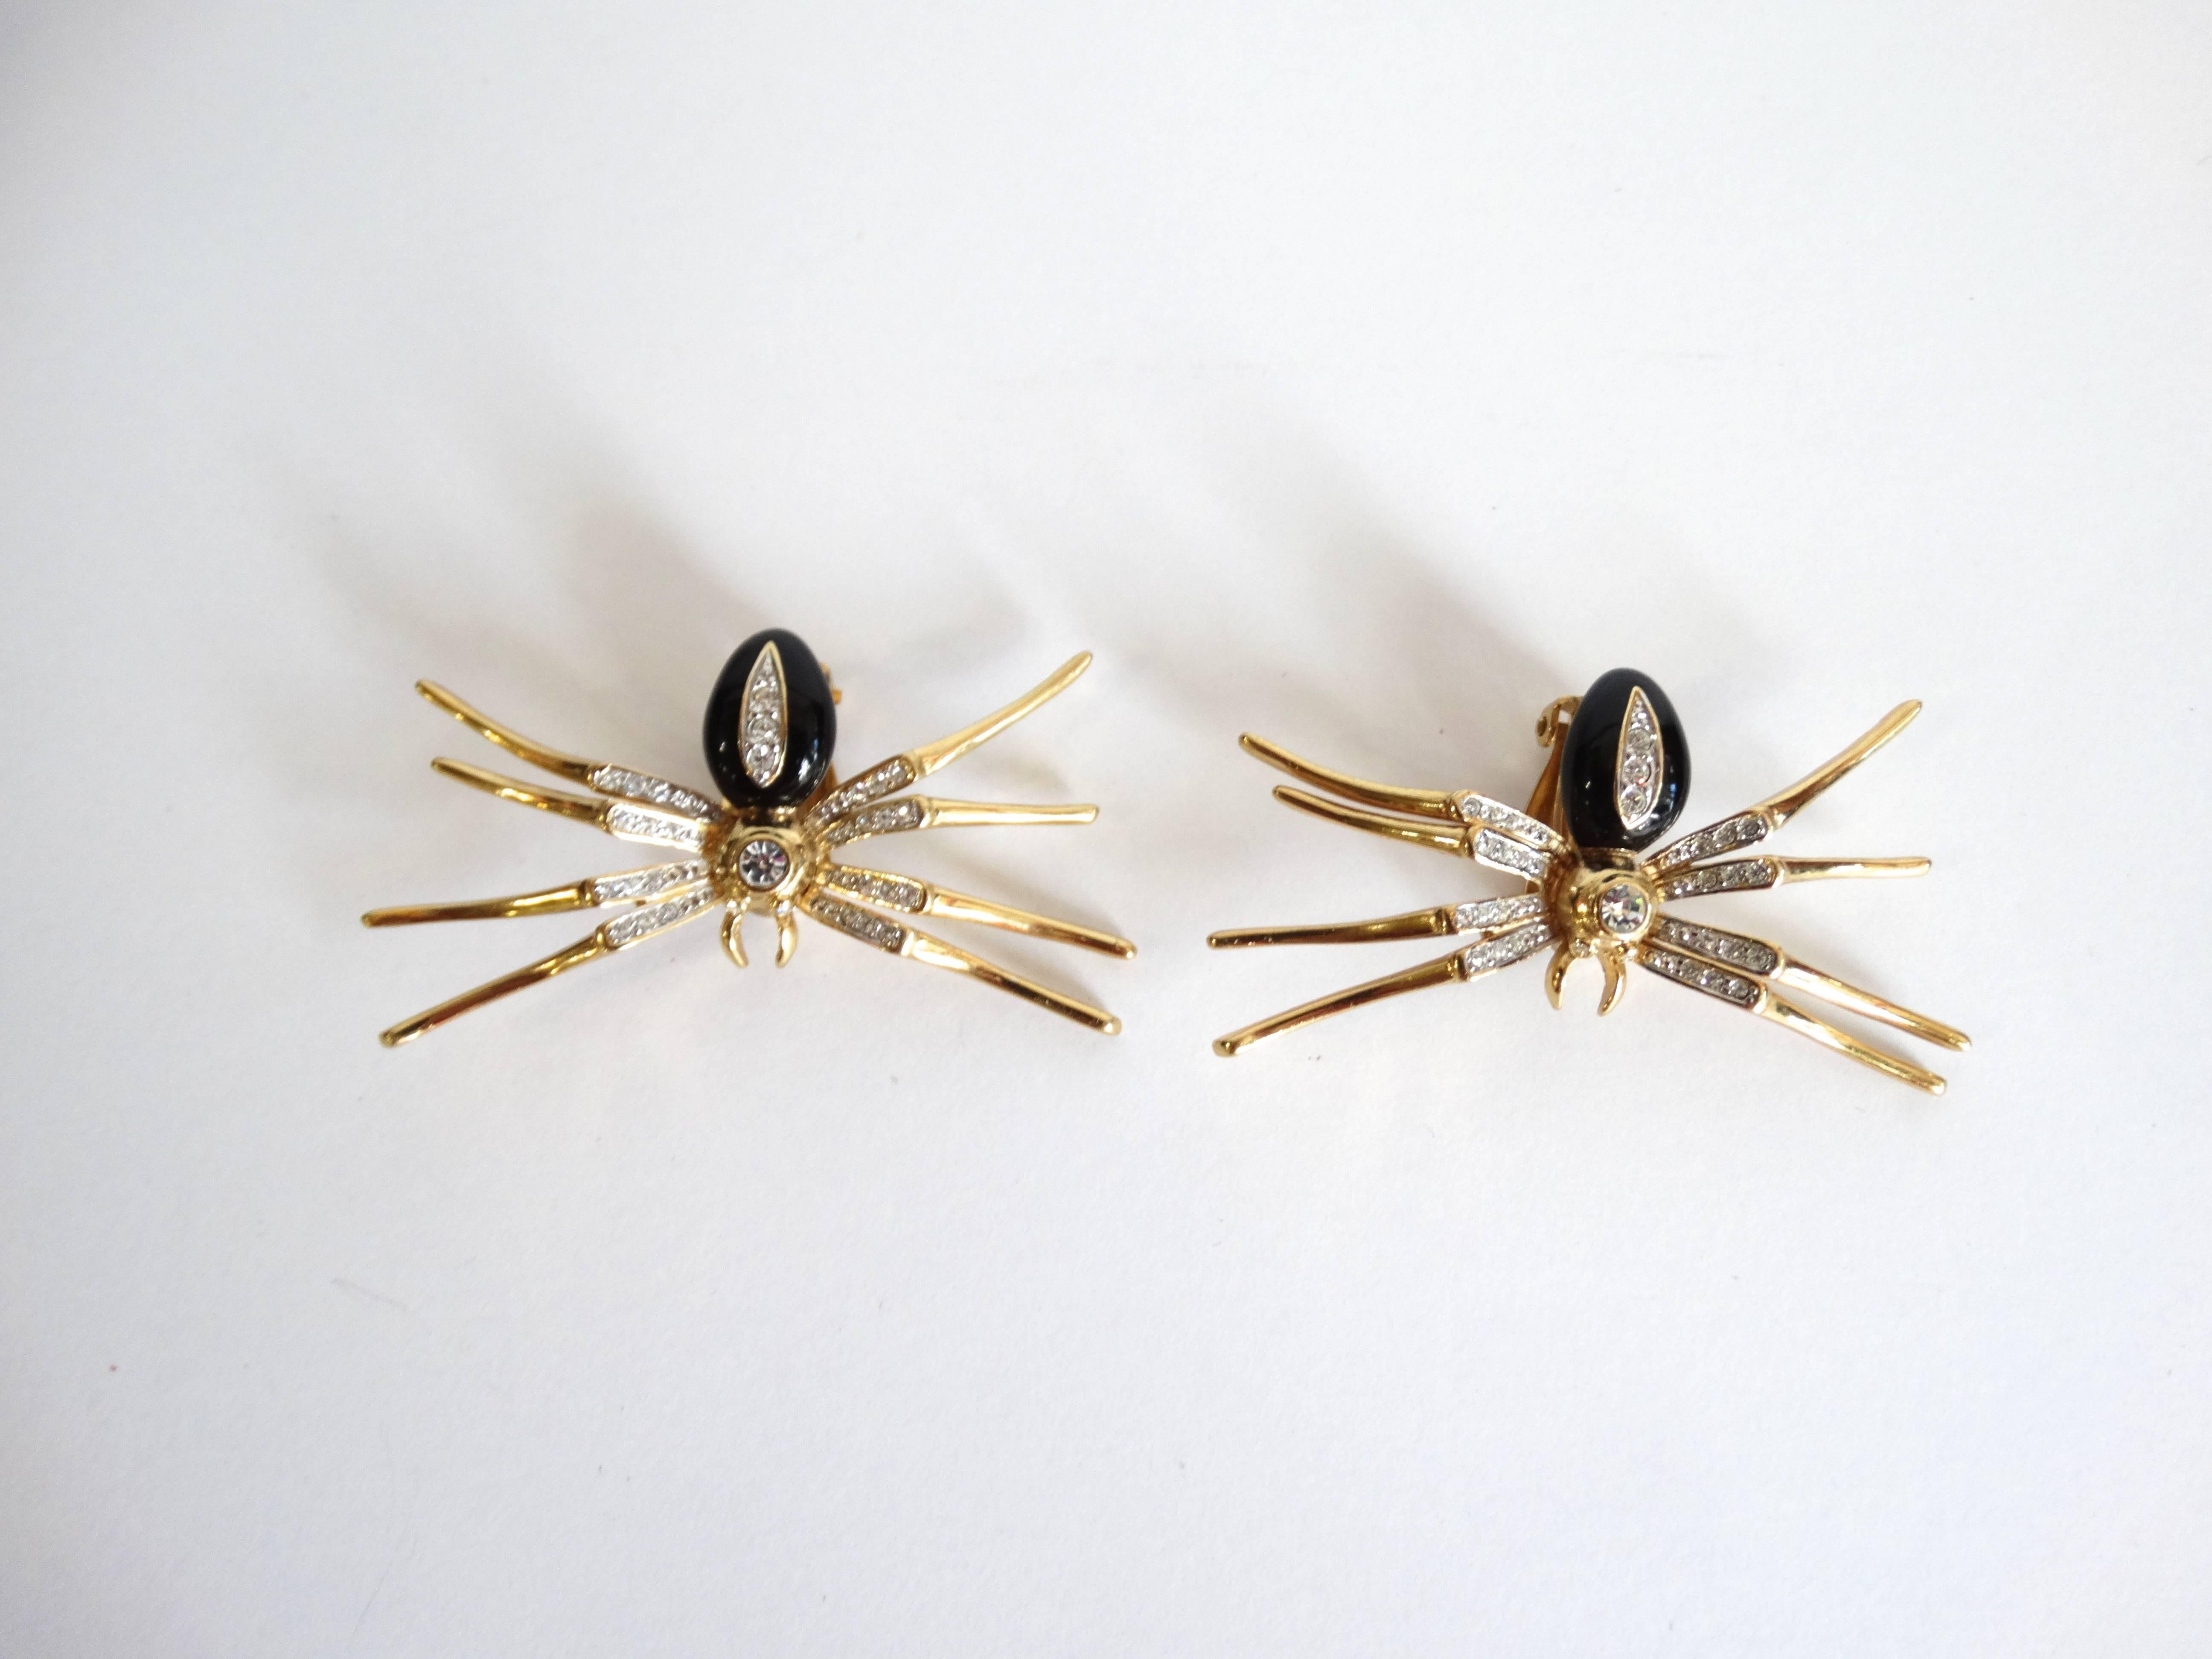 Stunning 1980's Black Widow Spider clip-on earrings. Enamel and Crystal Embellishments.

2.25